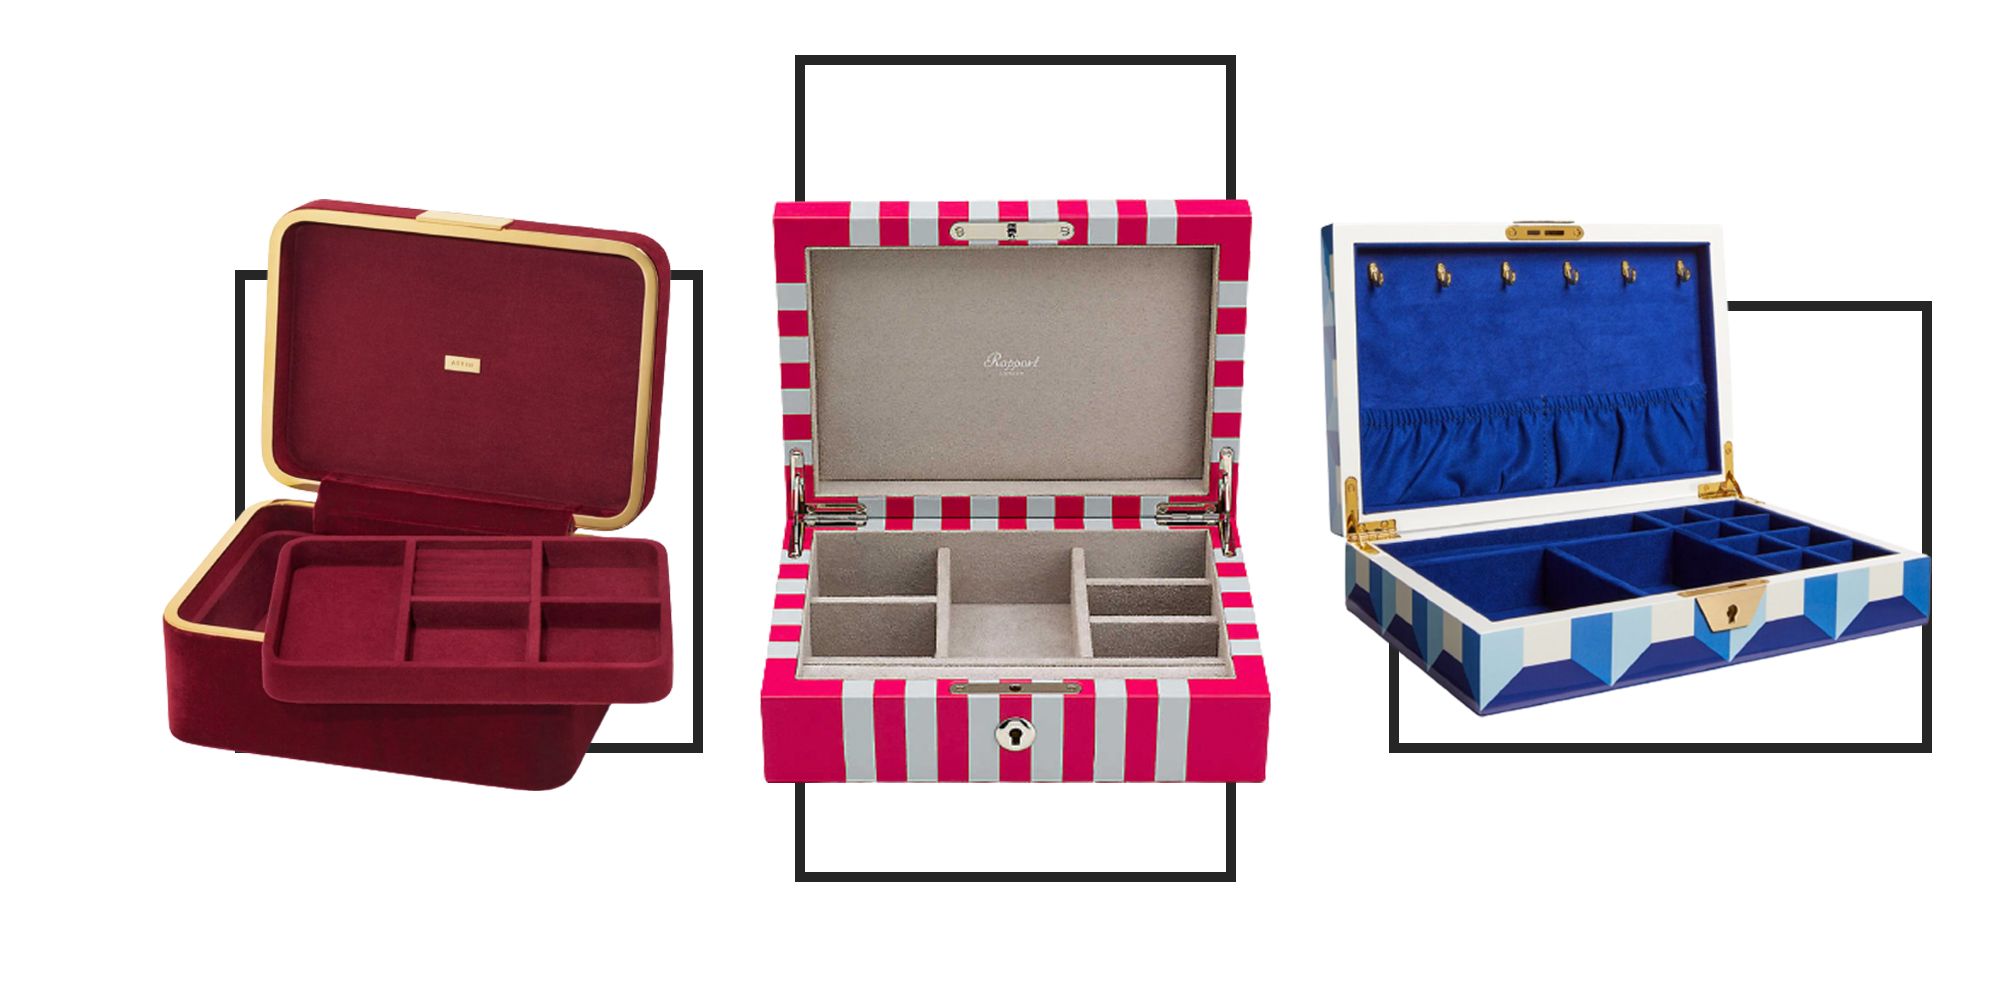 The best jewellery boxes to keep your heirlooms scratch-free